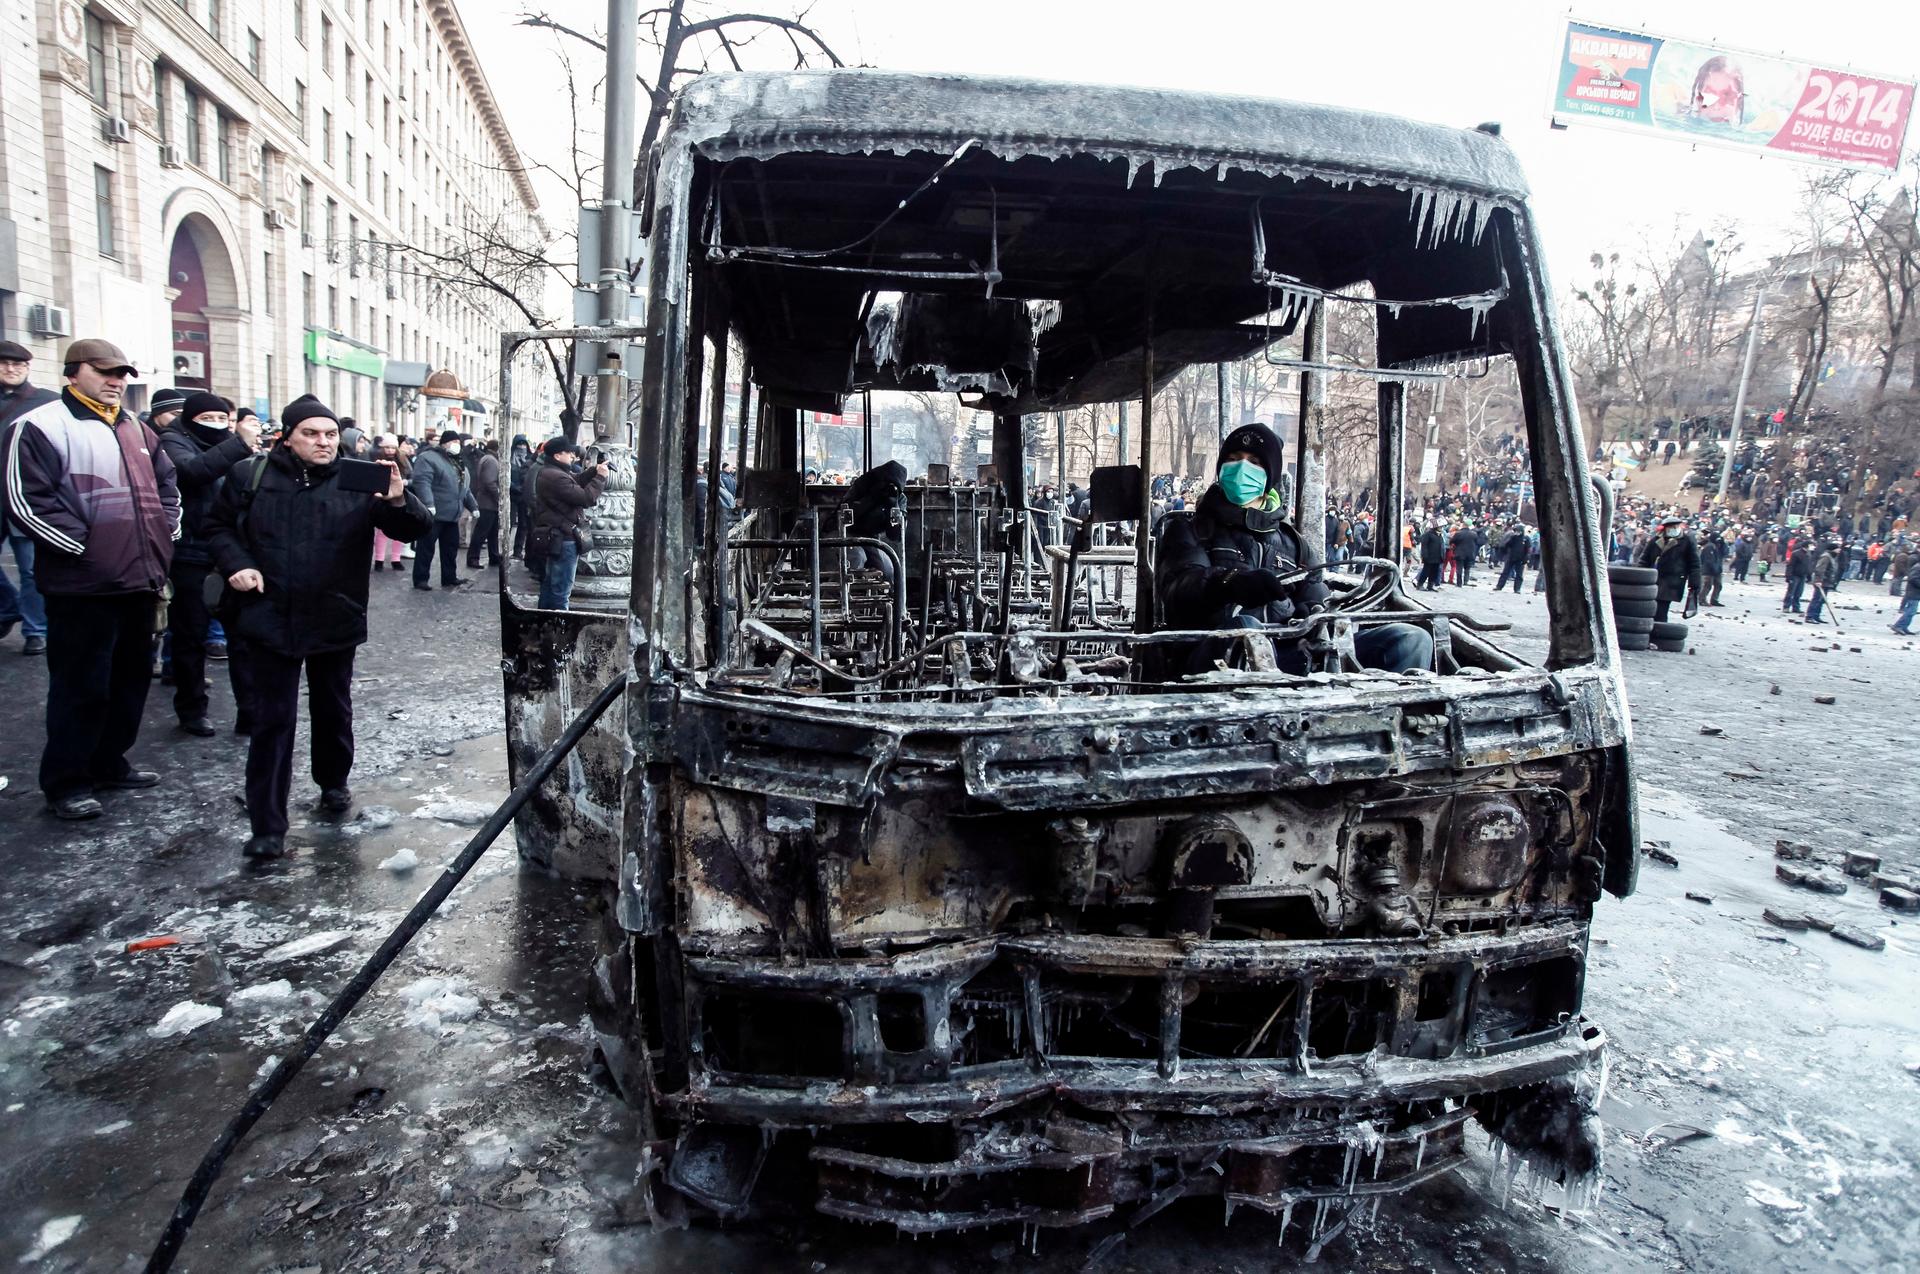 A pro-European integration protester sits in a burnt police bus after a rally near government administration buildings in Kiev January 20, 2014. With tension still high, about 1,000 protesters confronted police on Monday near Kiev's main government headqu